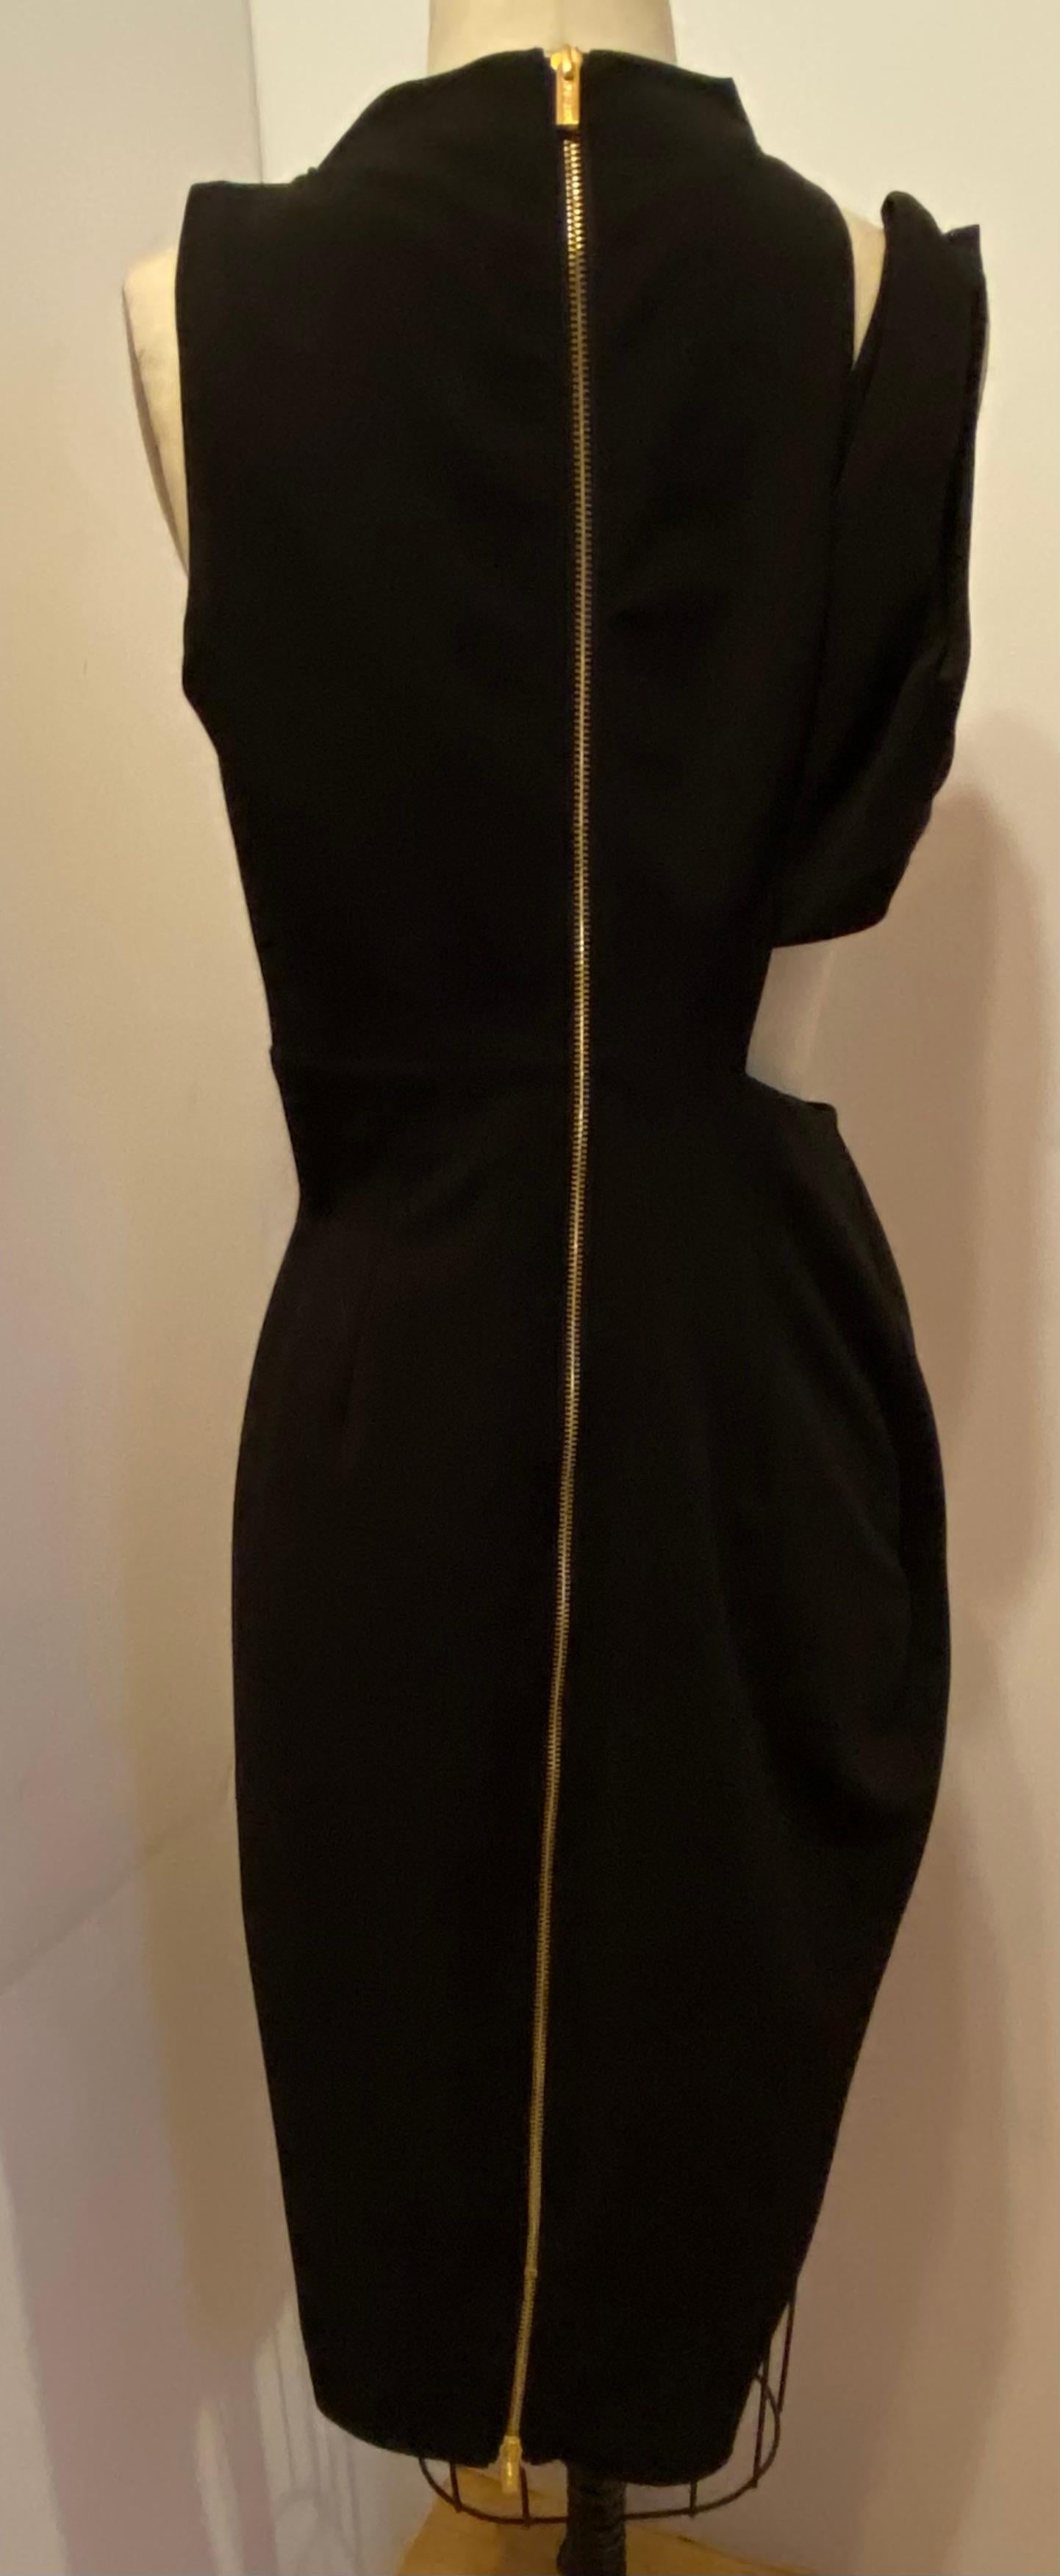 'House of London' Black Abstract Deconstruct Whimsical Evening Cocktail Dress For Sale 6